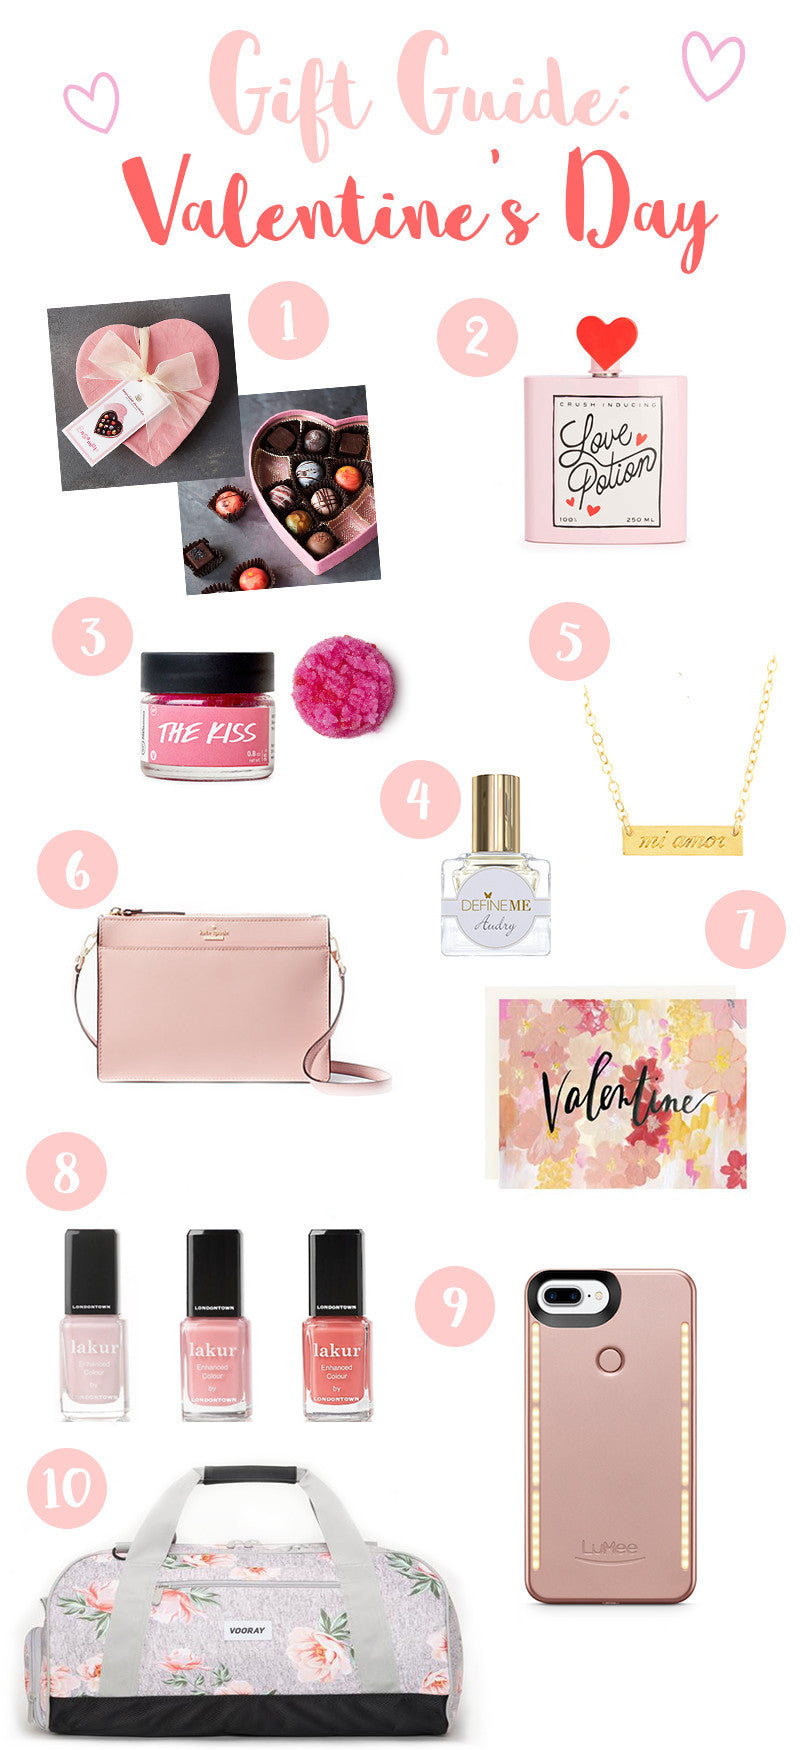 Valentine's Day Gift Guide products shown together.